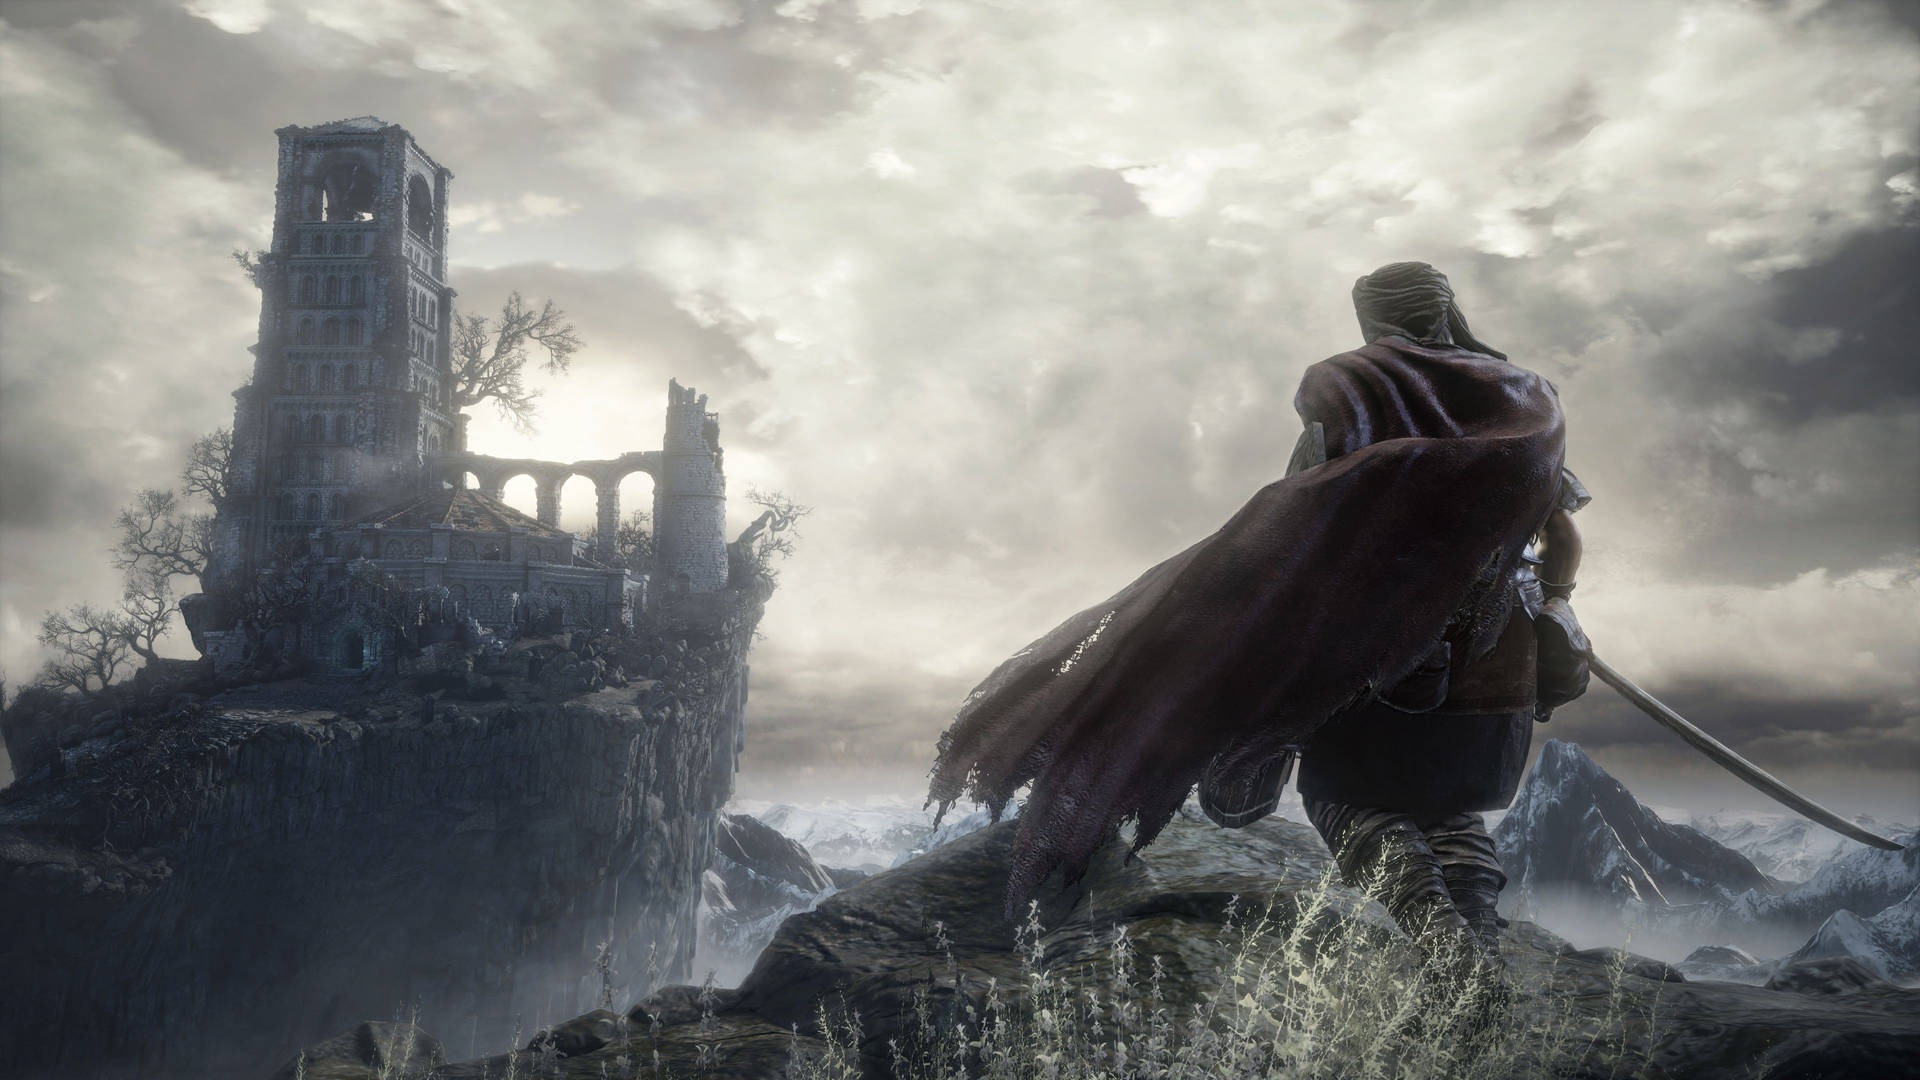 Dark Souls 3 3840X2160 Wallpaper and Background Image